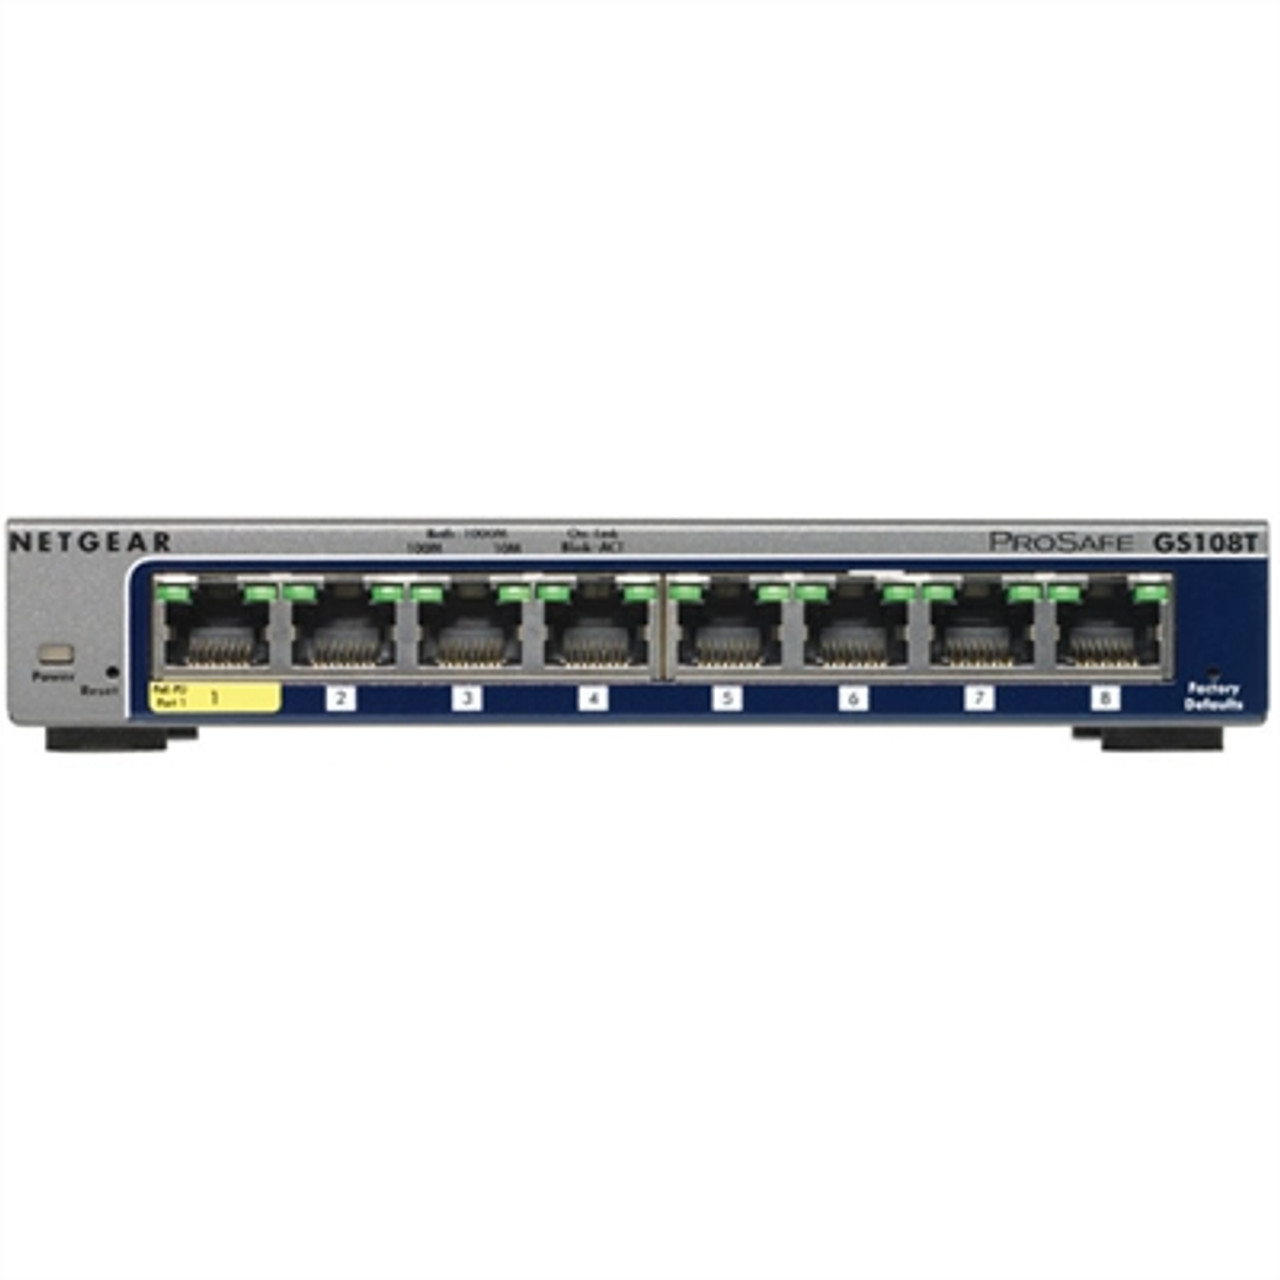 Smart Cloud Switches - GS108Tv3